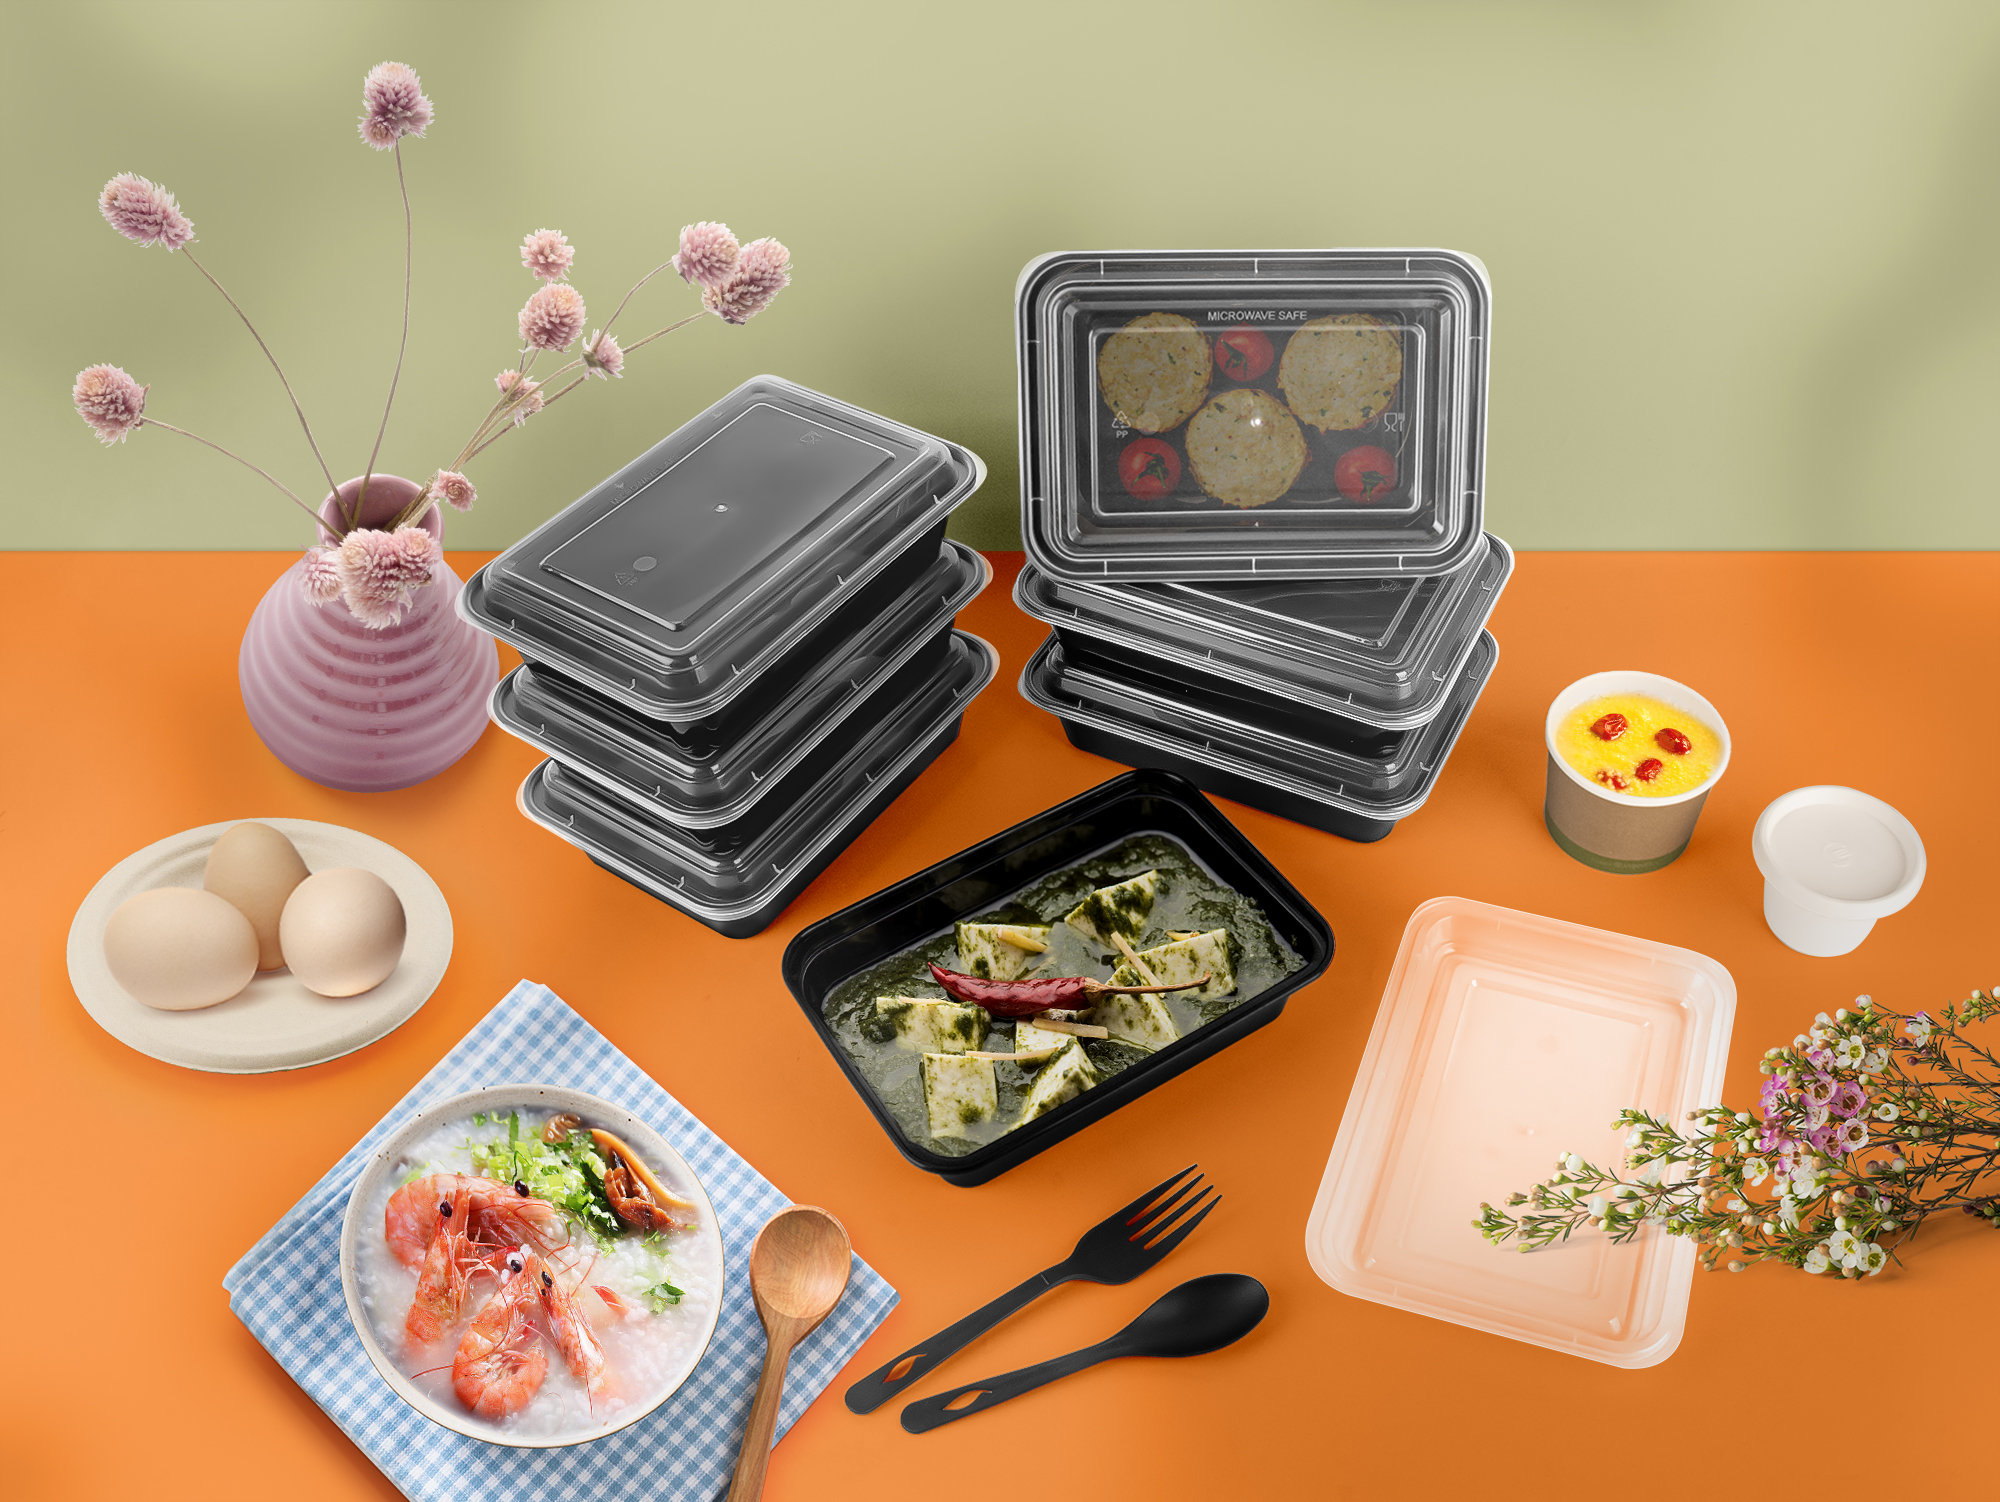 Comfy Package [50 Sets] 24 oz. Meal Prep Containers with Lids, 1 Compartment Lunch Containers, Bento Boxes, Food Storage Containers